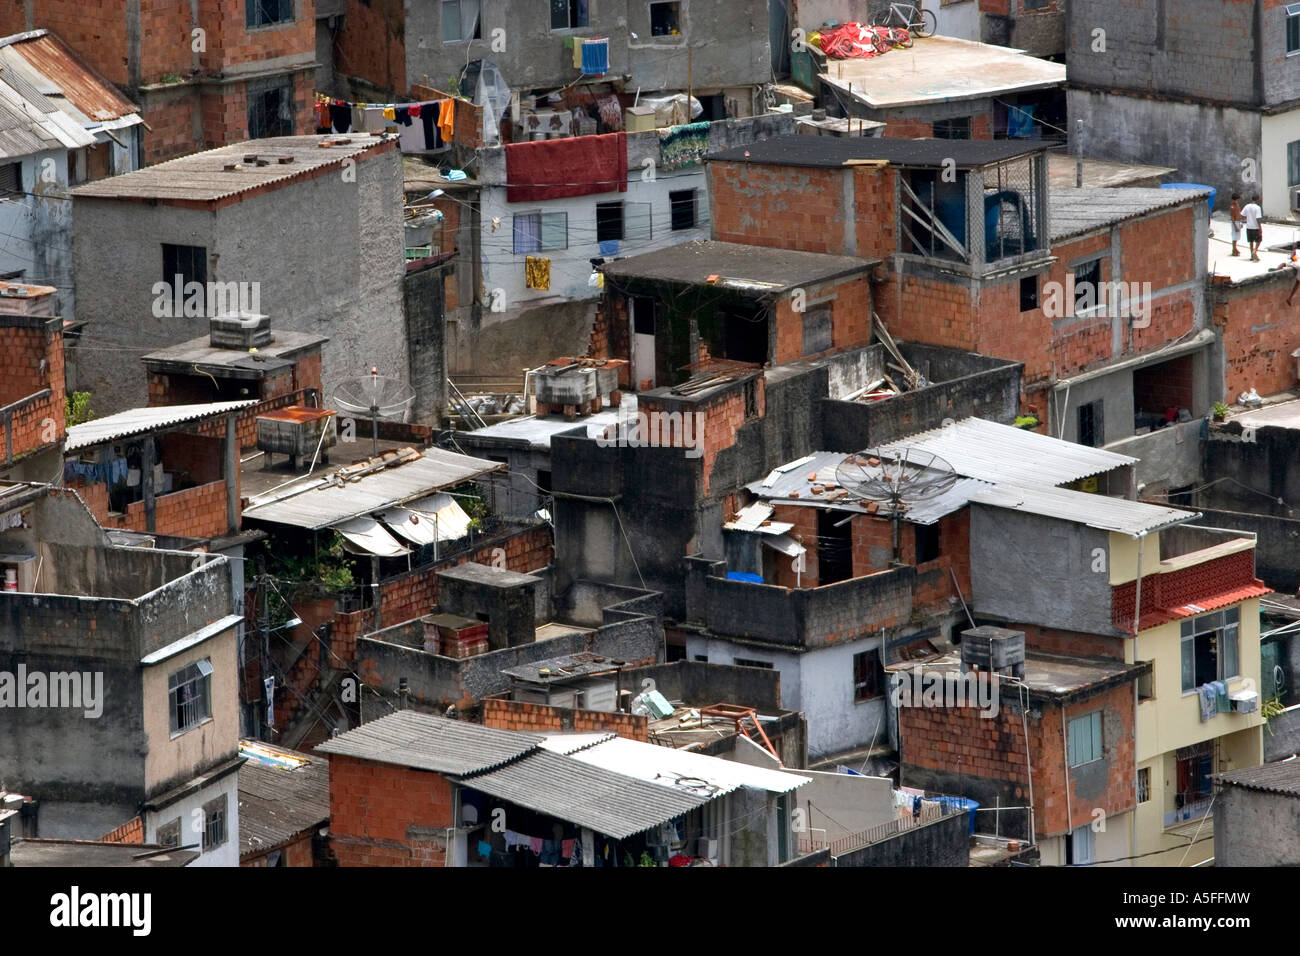 Hillside Favela In Rio De Janeiro Brazil These Slums Are Home To Thousands Of Poor People Squatting On Public Land Stock Photo Alamy